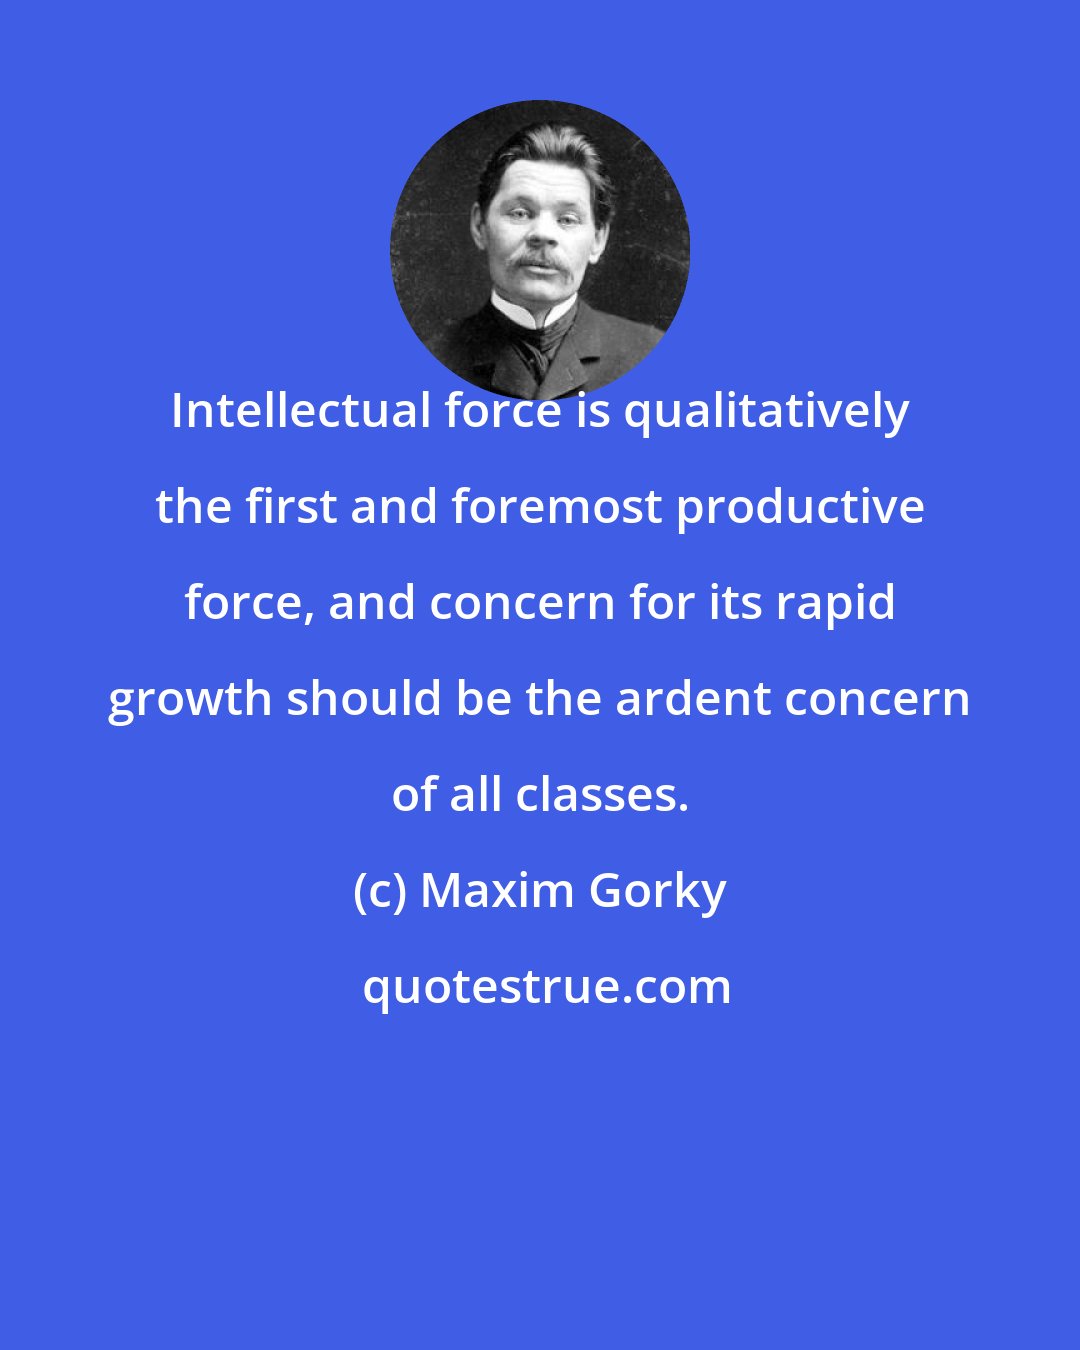 Maxim Gorky: Intellectual force is qualitatively the first and foremost productive force, and concern for its rapid growth should be the ardent concern of all classes.